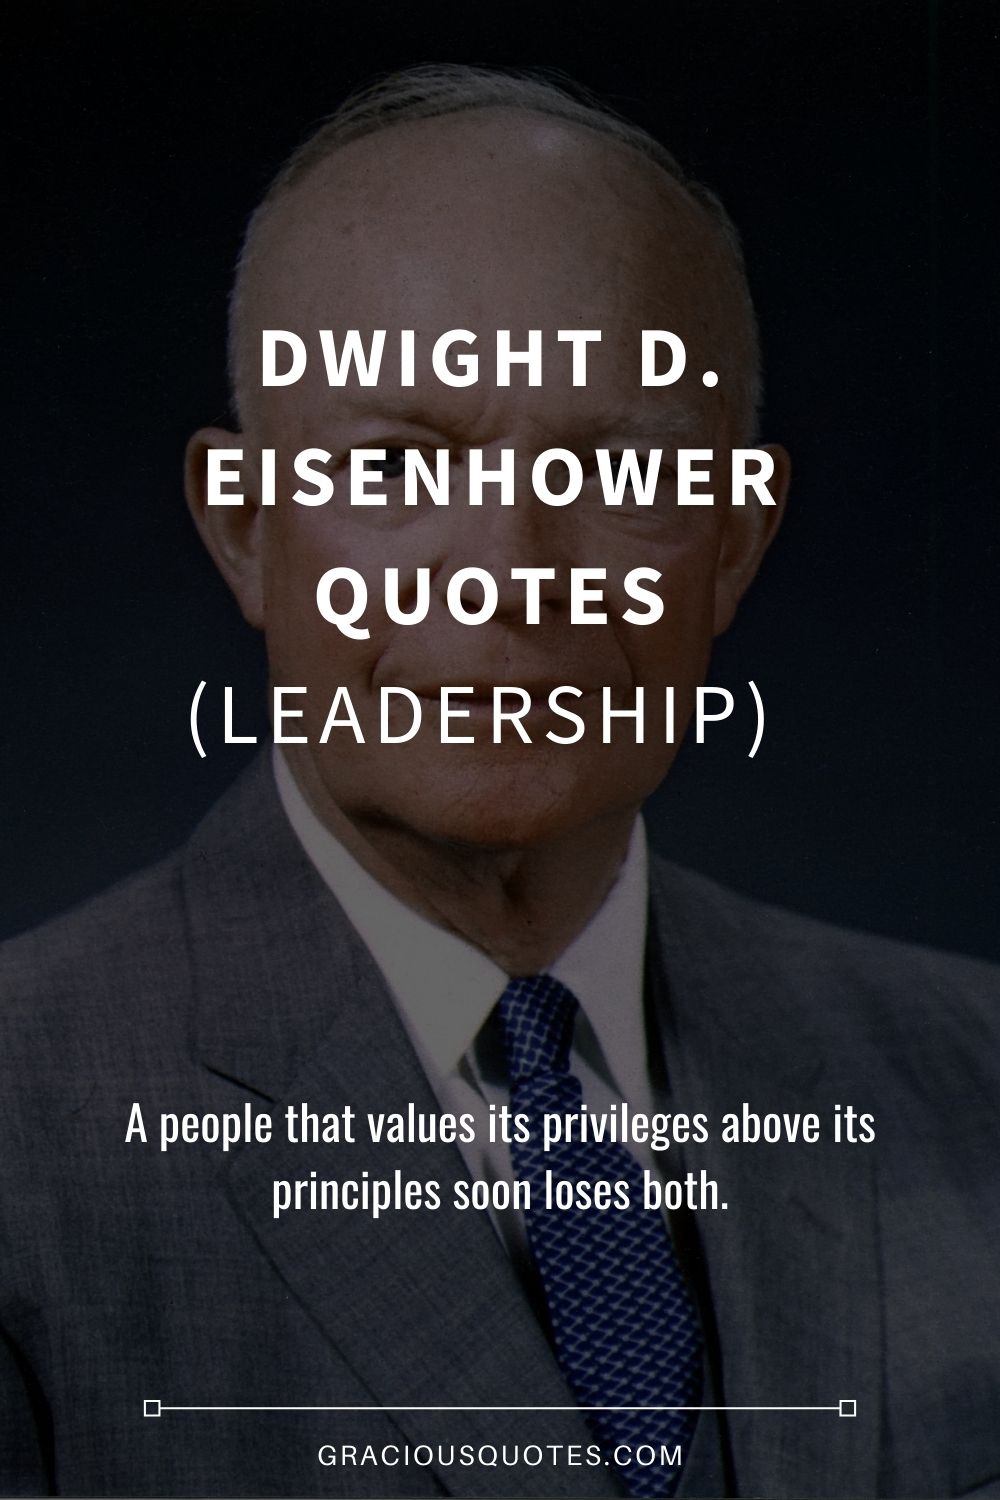 Dwight D. Eisenhower Quotes (LEADERSHIP) - Gracious Quotes